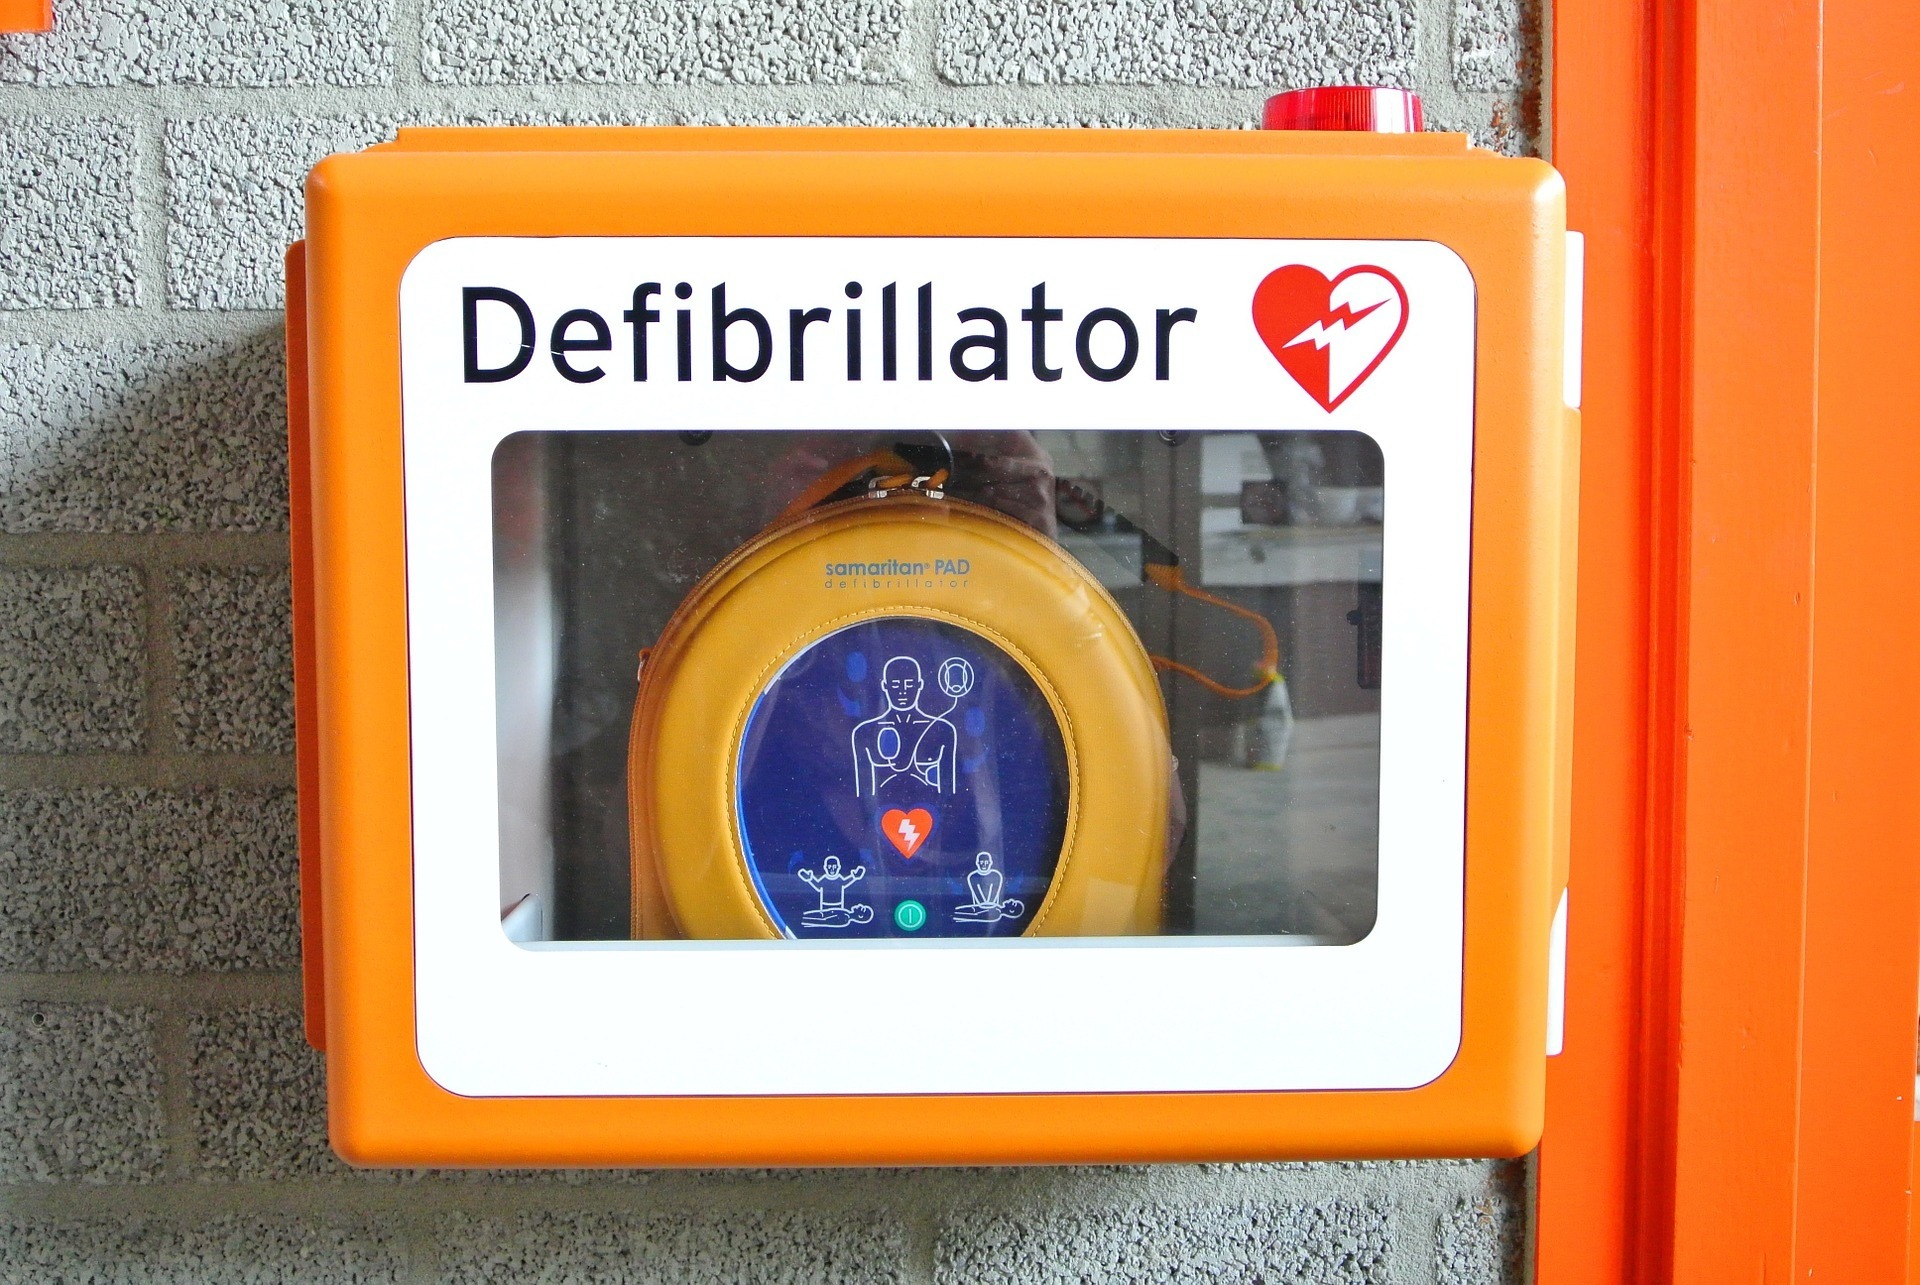 Cardiac arrest survival increases with bystanders use of automated external defibrillator